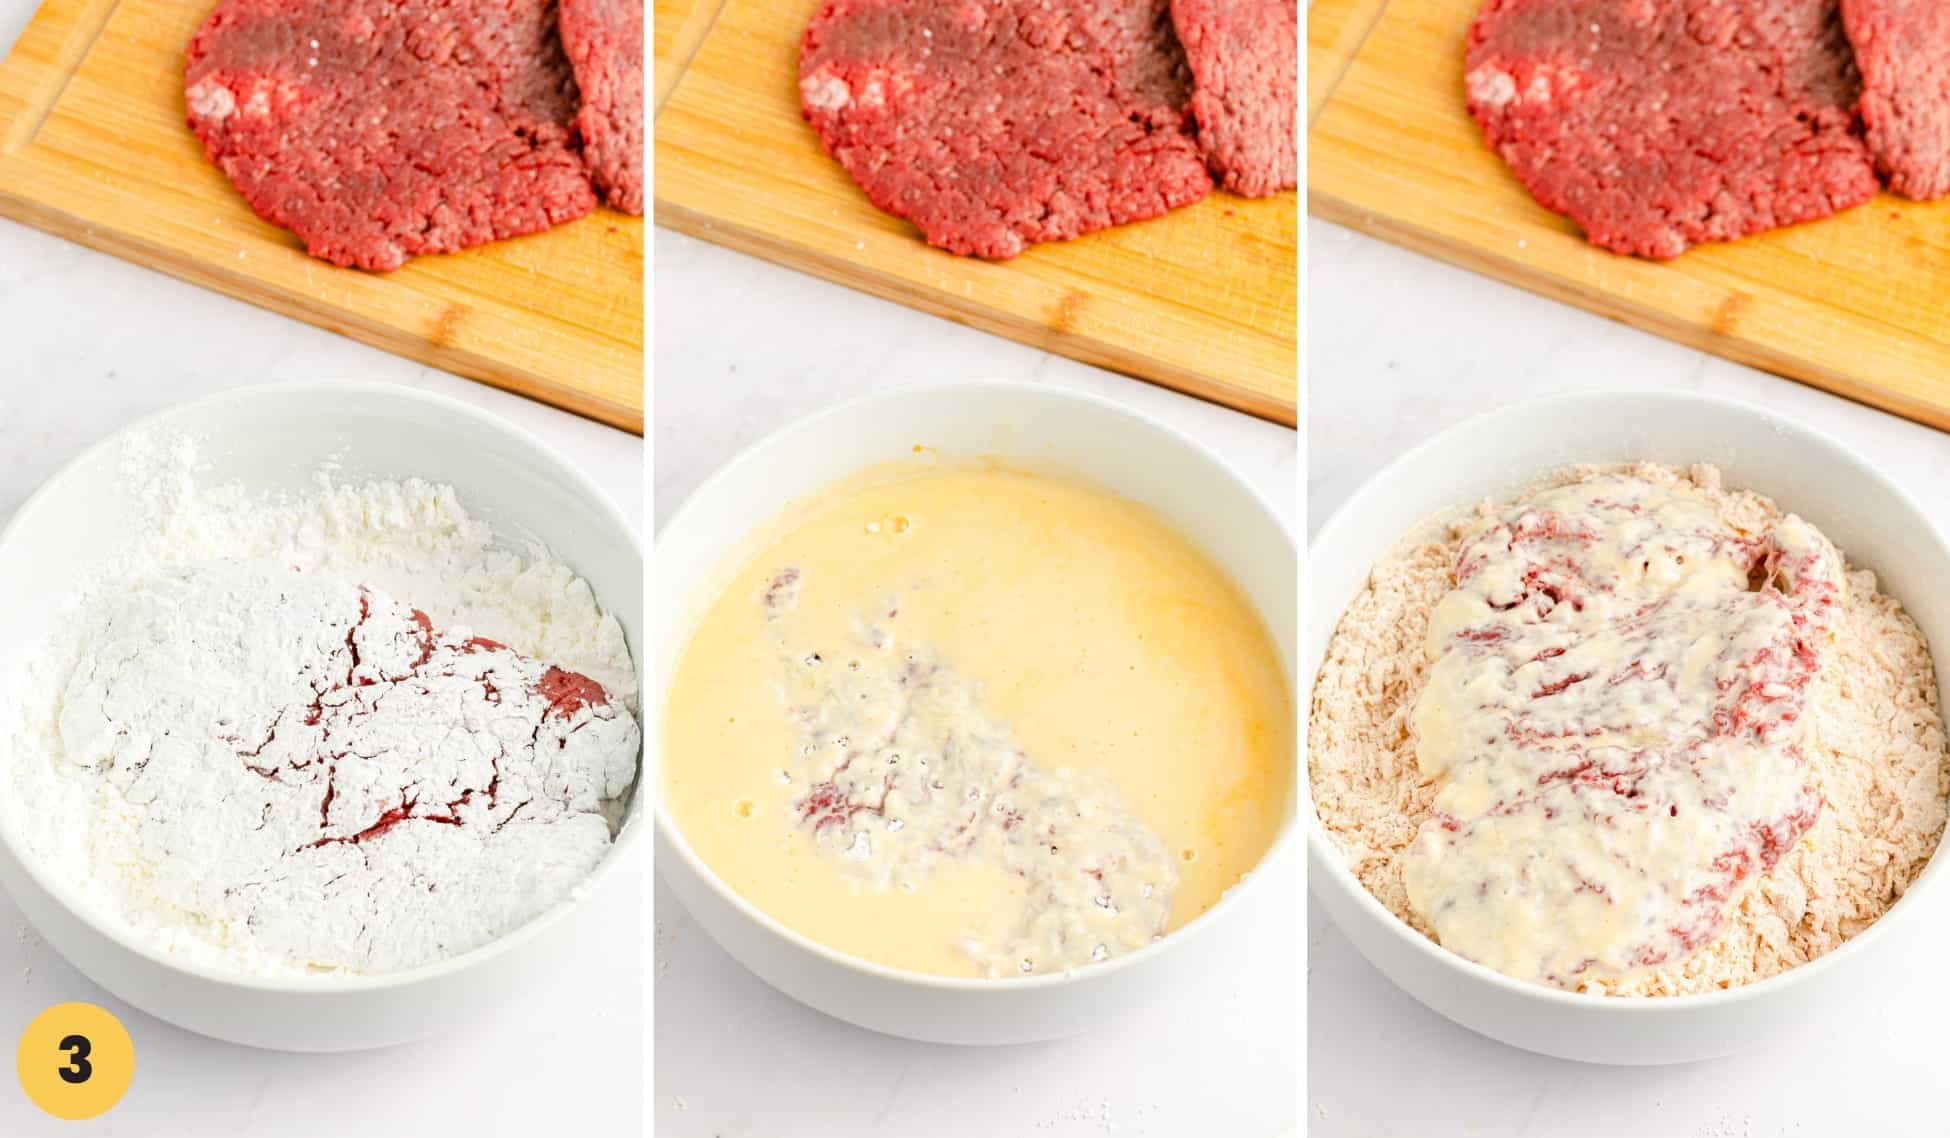 Collage of 3 images showing how to dredge cube steak in cornstarch, egg, and flour